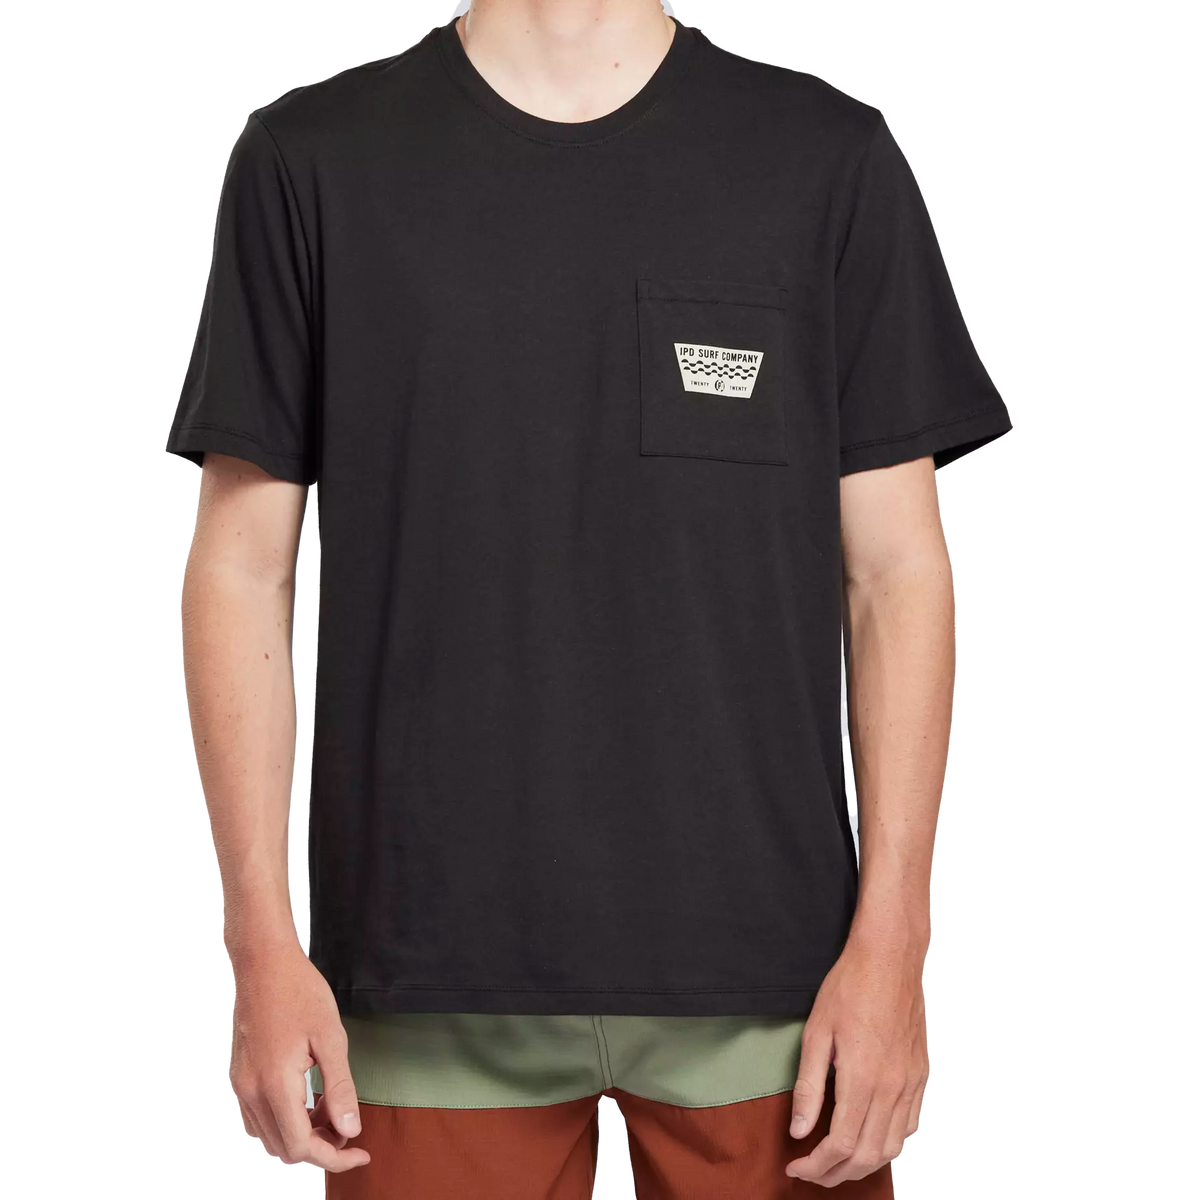 Black tee with I P D labeled front chest pocket.